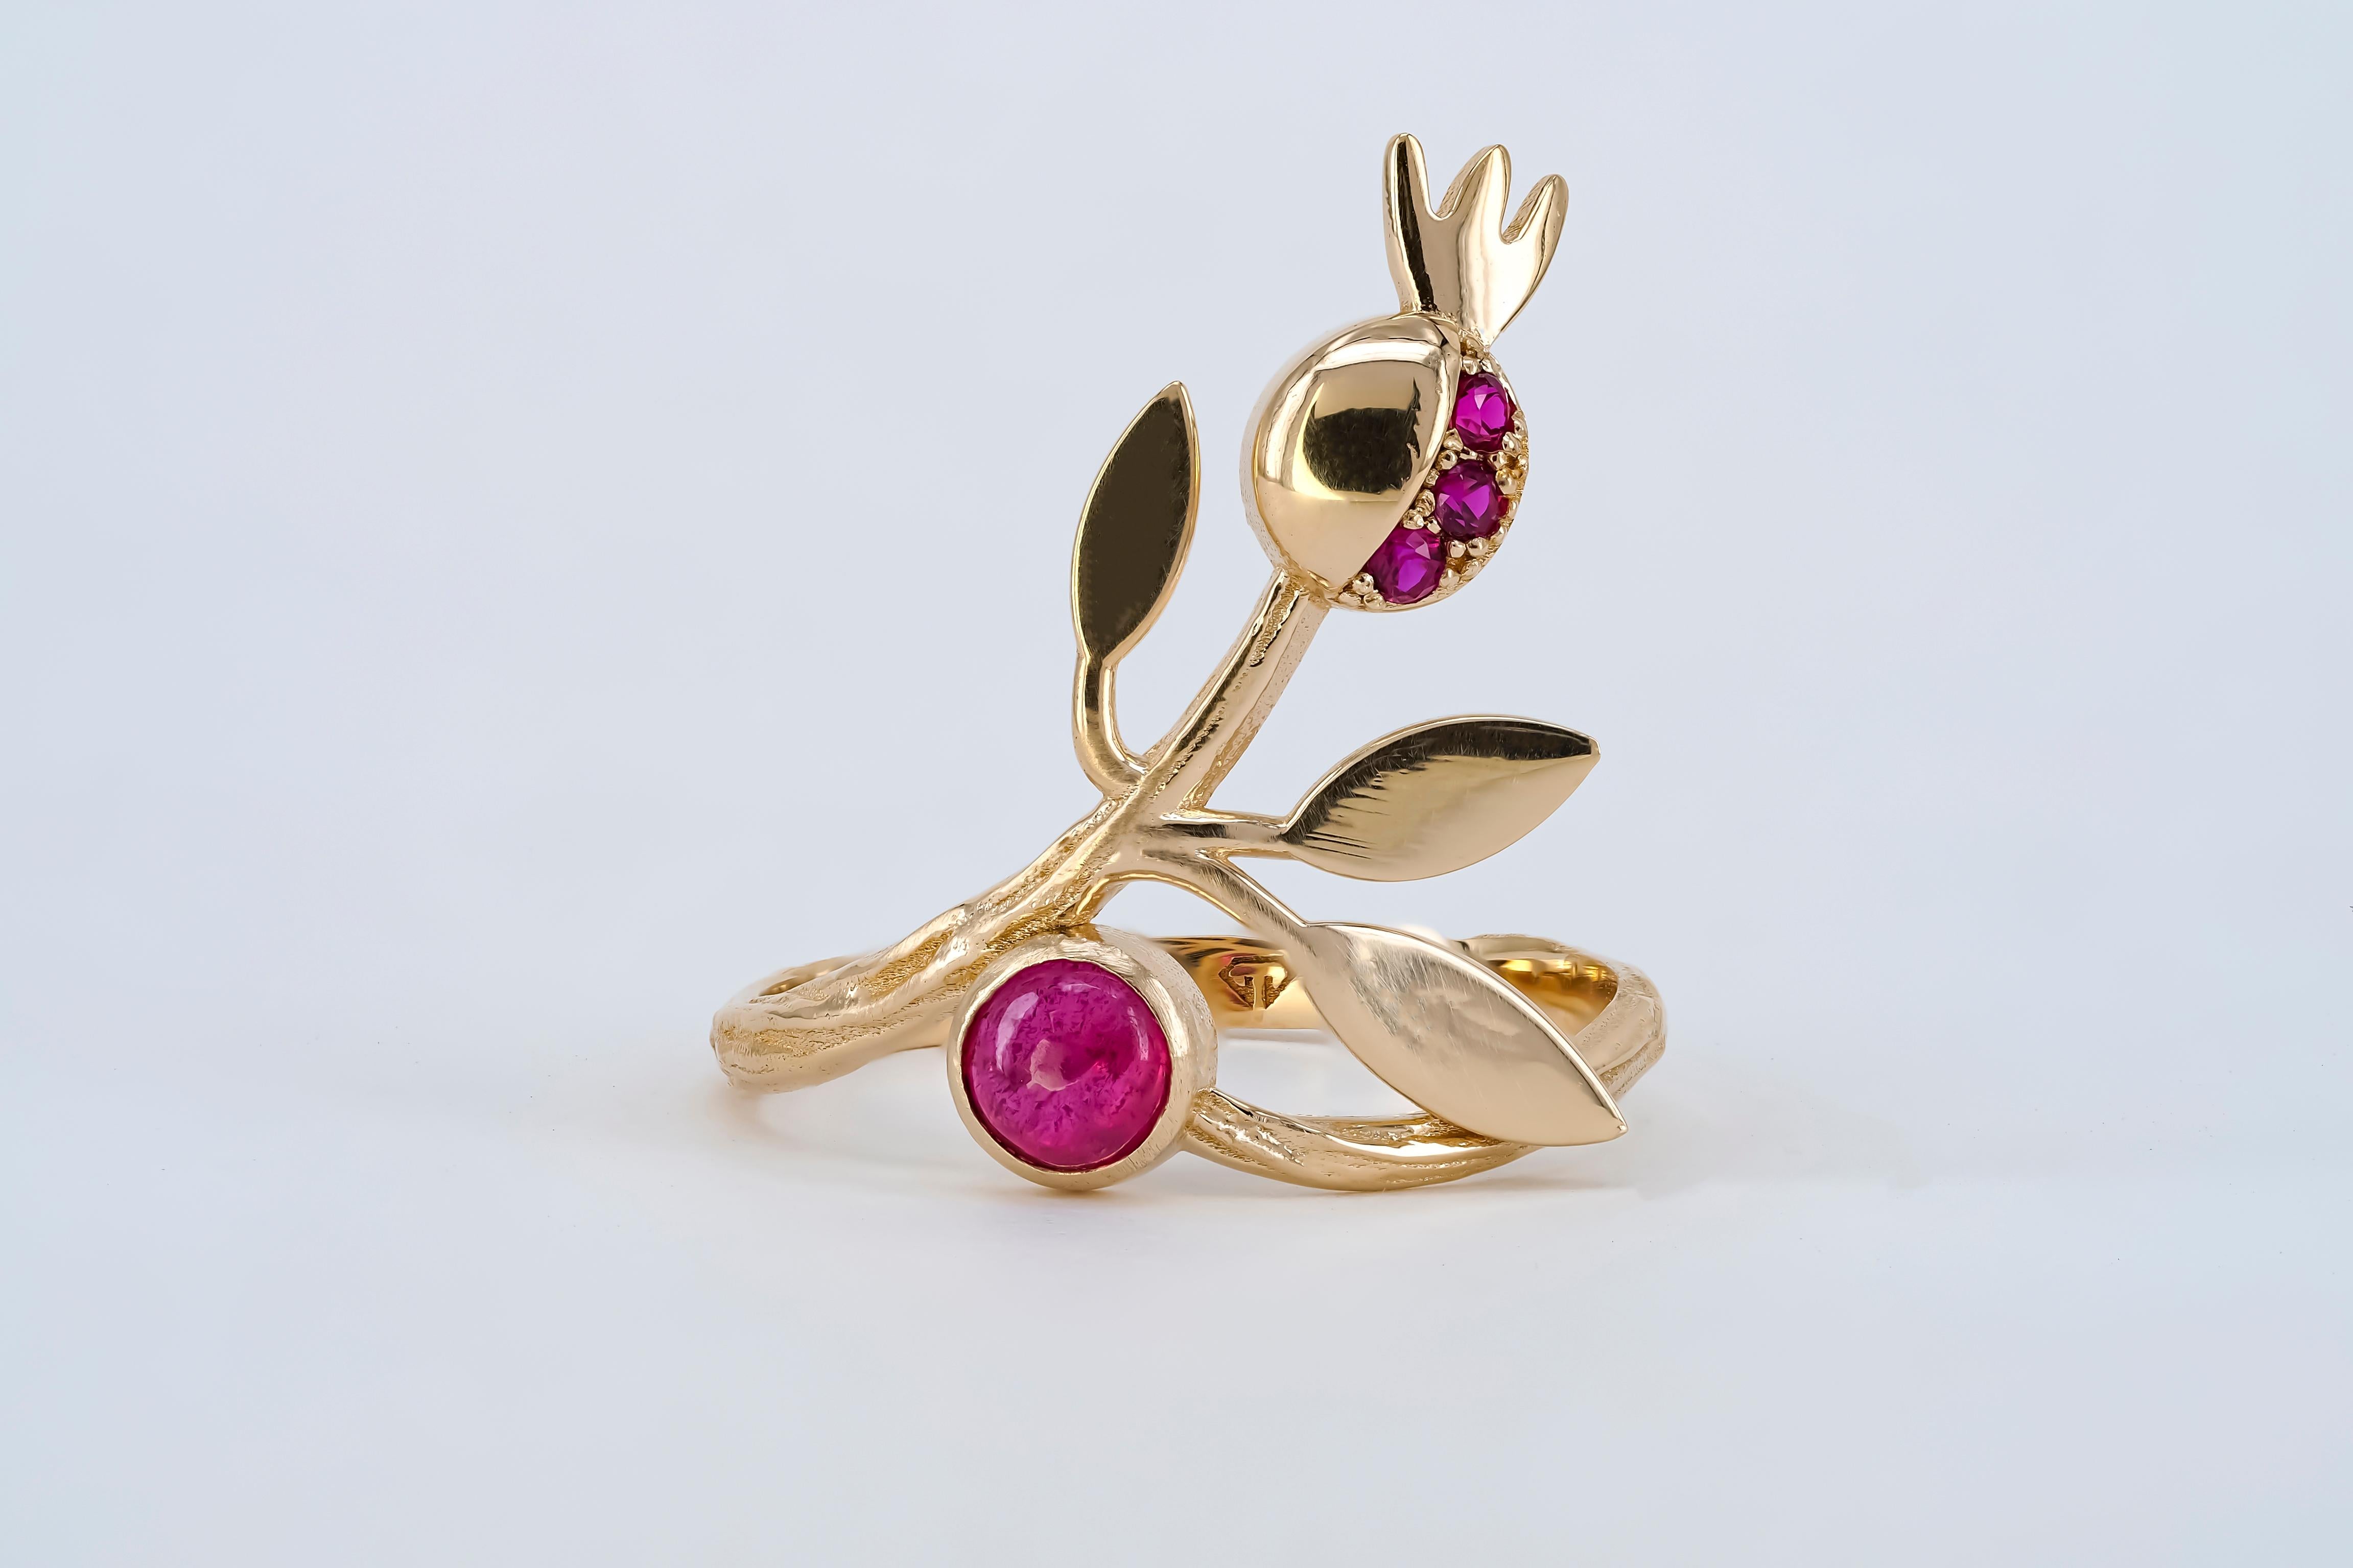 For Sale:  14 karat Gold Ring with Ruby, Sapphires. Pomegranate ring. July birthstone ring! 14